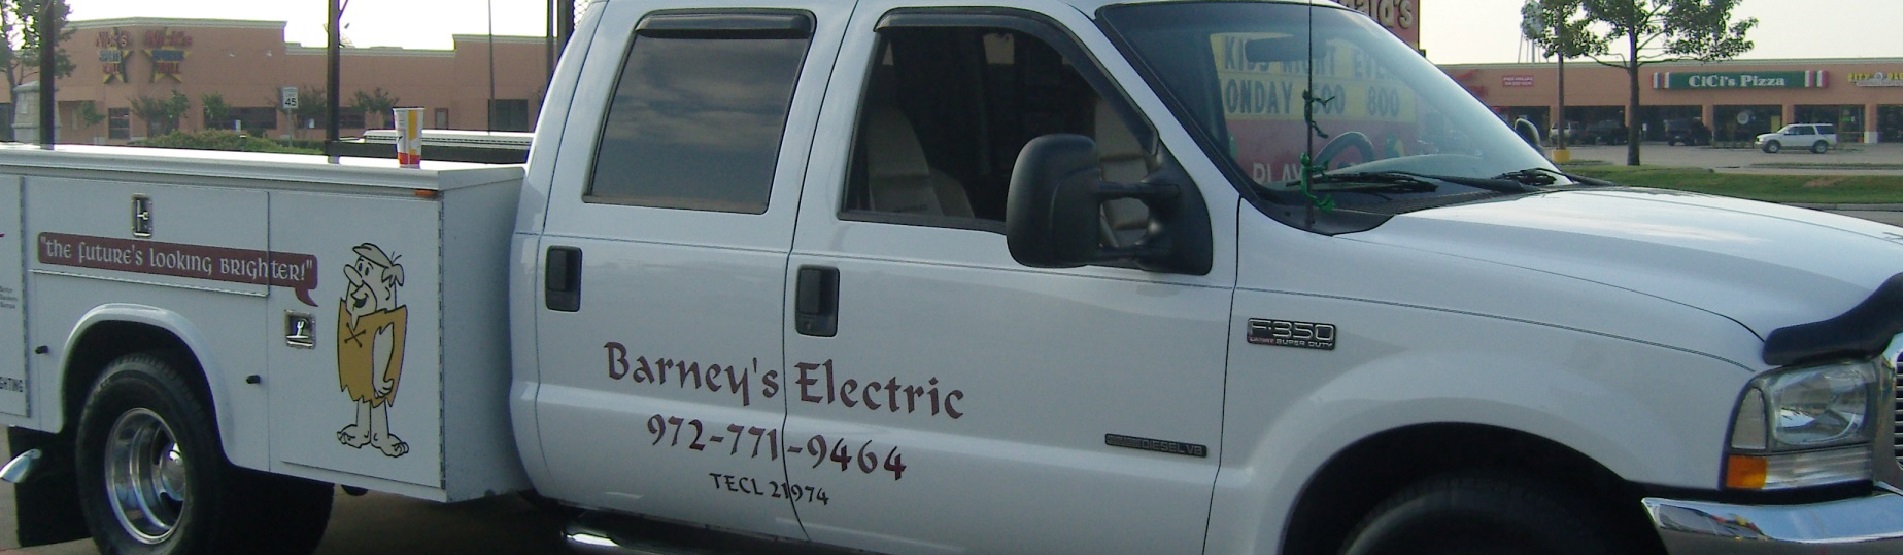 Electrician Heath TX Barney's Electric Full Service Electrician Residential Commercial Retail and New Construction Wiring Repair Installation Service 24 Hour Emergency Services Master Electrician Rockwall Texas